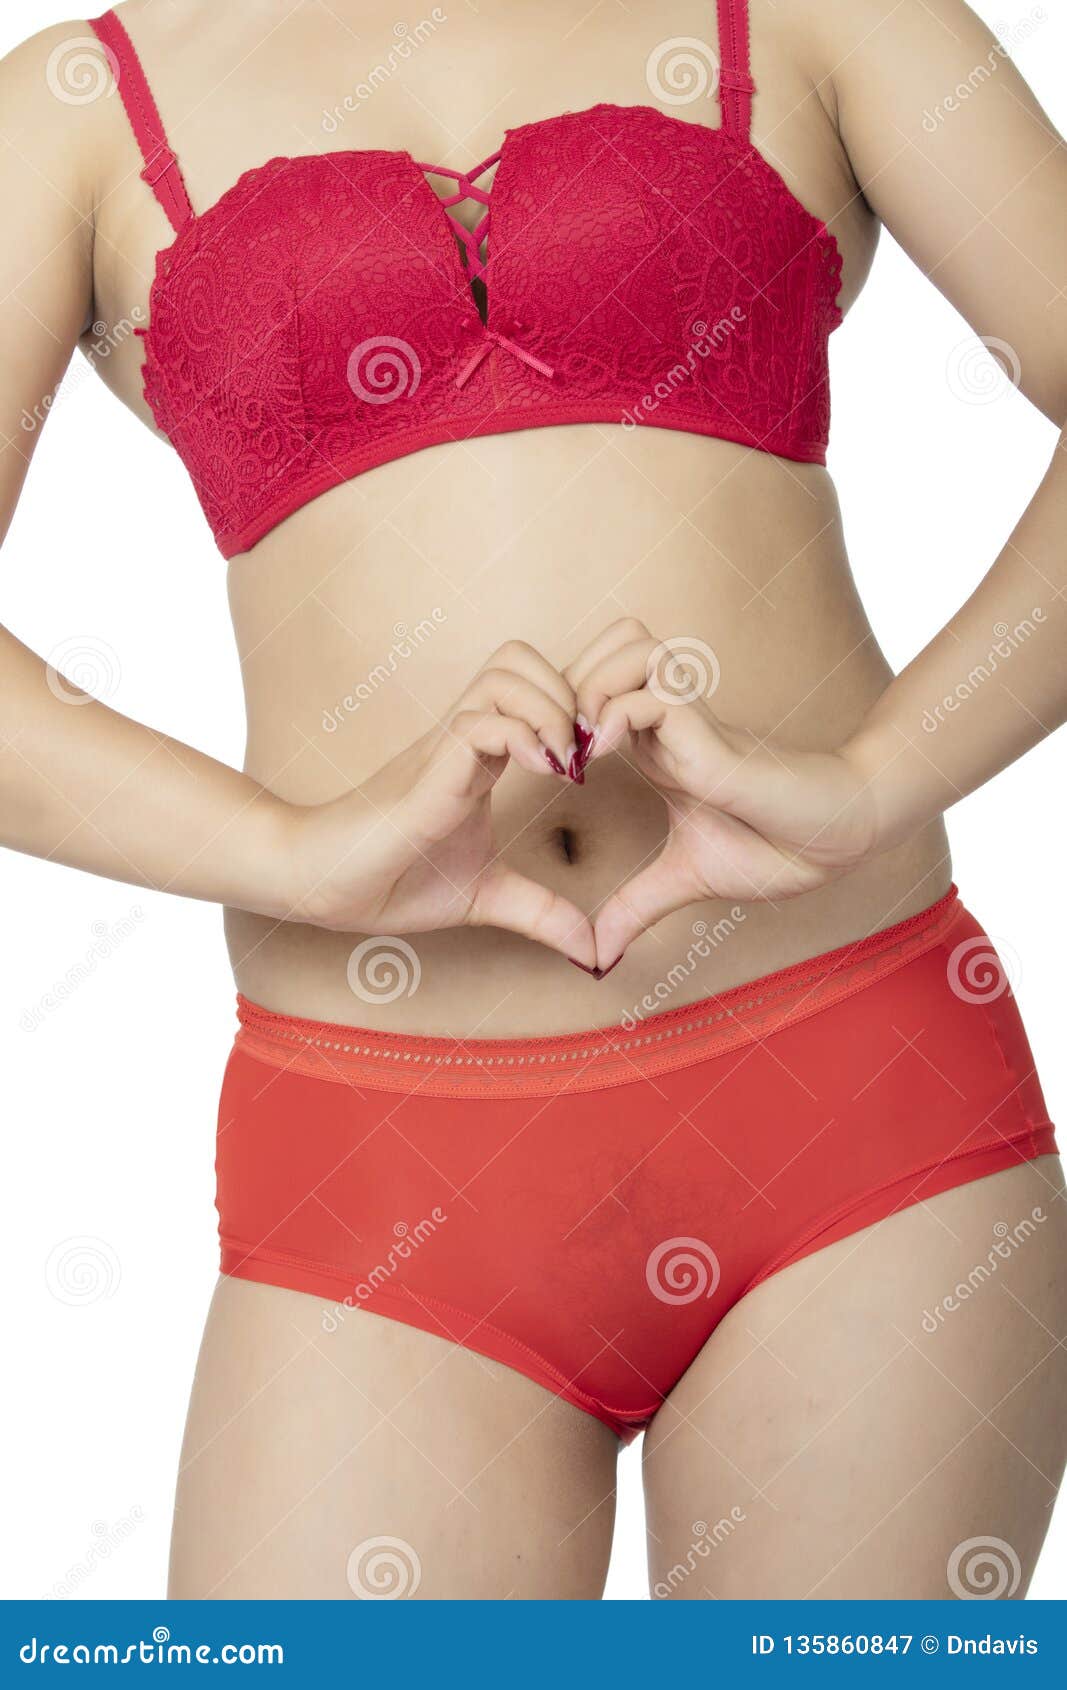 https://thumbs.dreamstime.com/z/beautiful-chinese-woman-posing-pair-red-panties-bra-isolated-white-background-chinese-woman-posing-panties-135860847.jpg